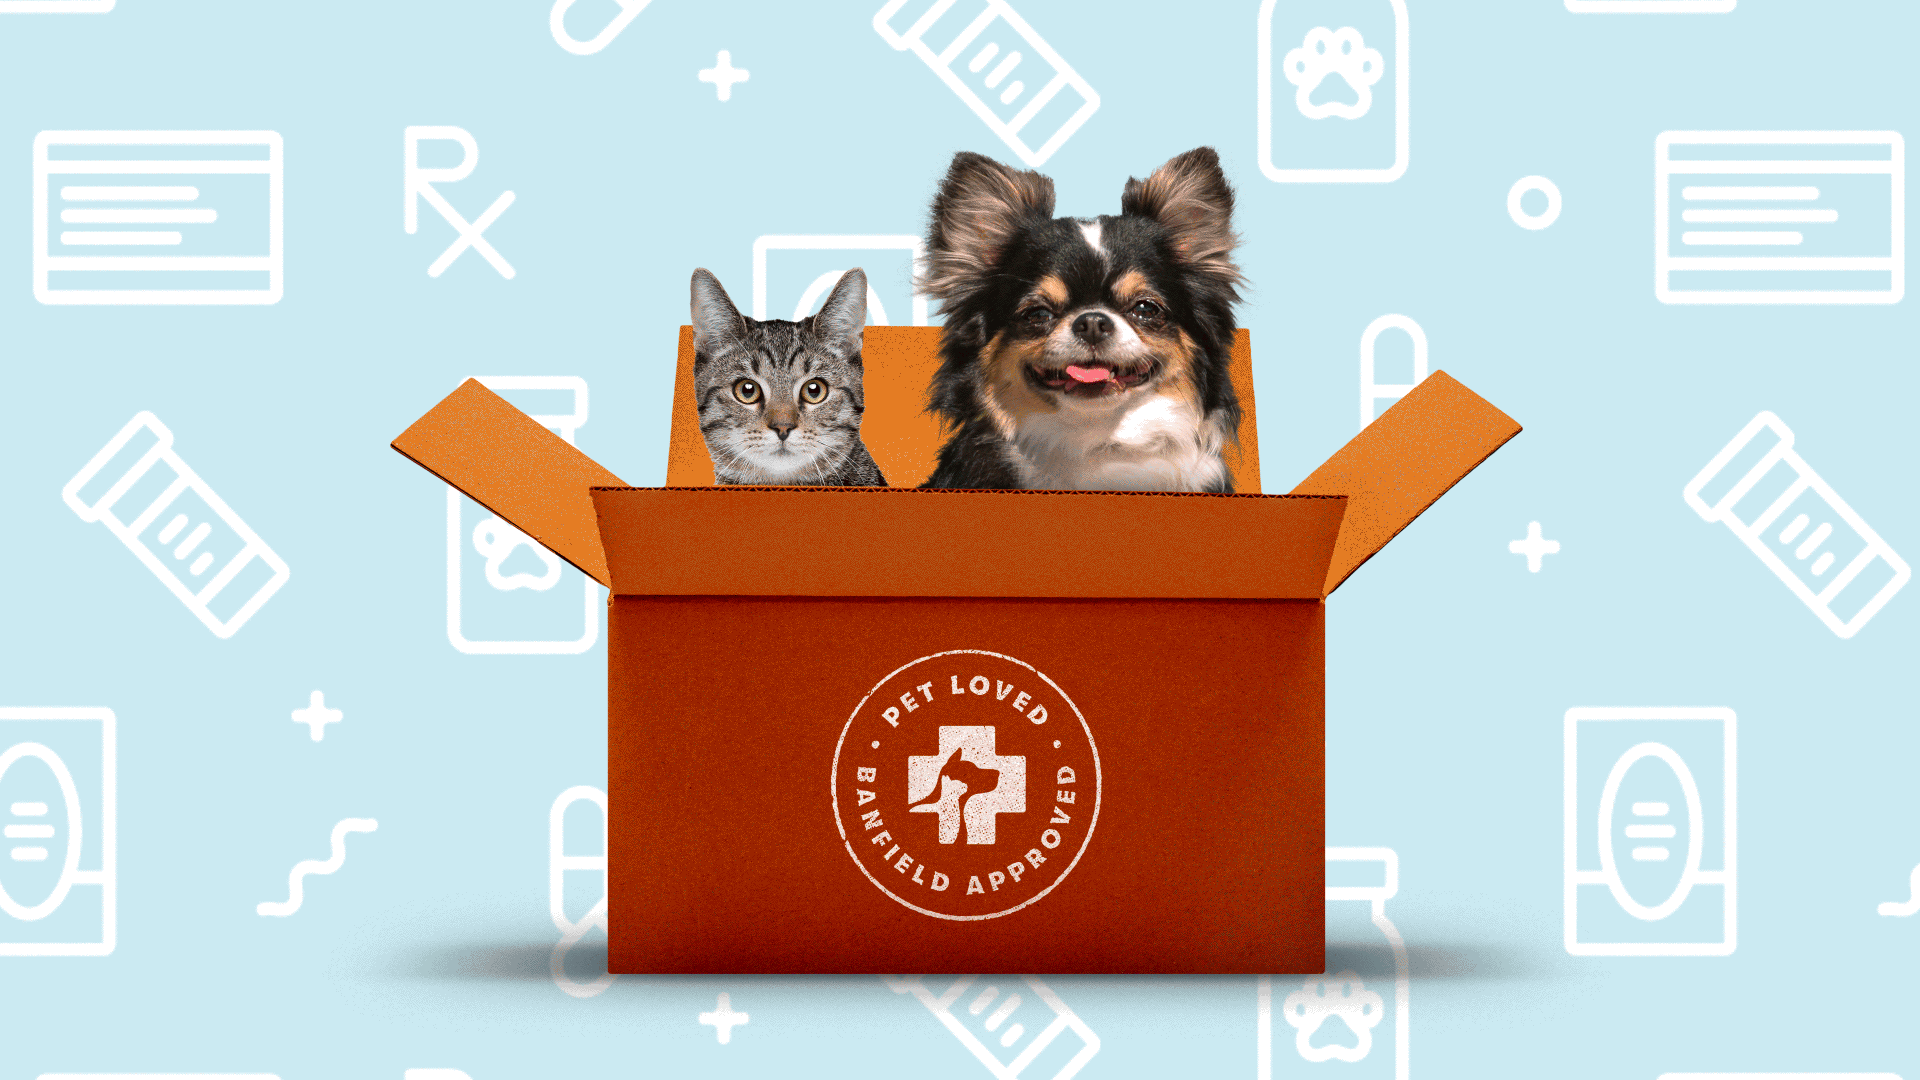 a gif of a dog and cat in a box